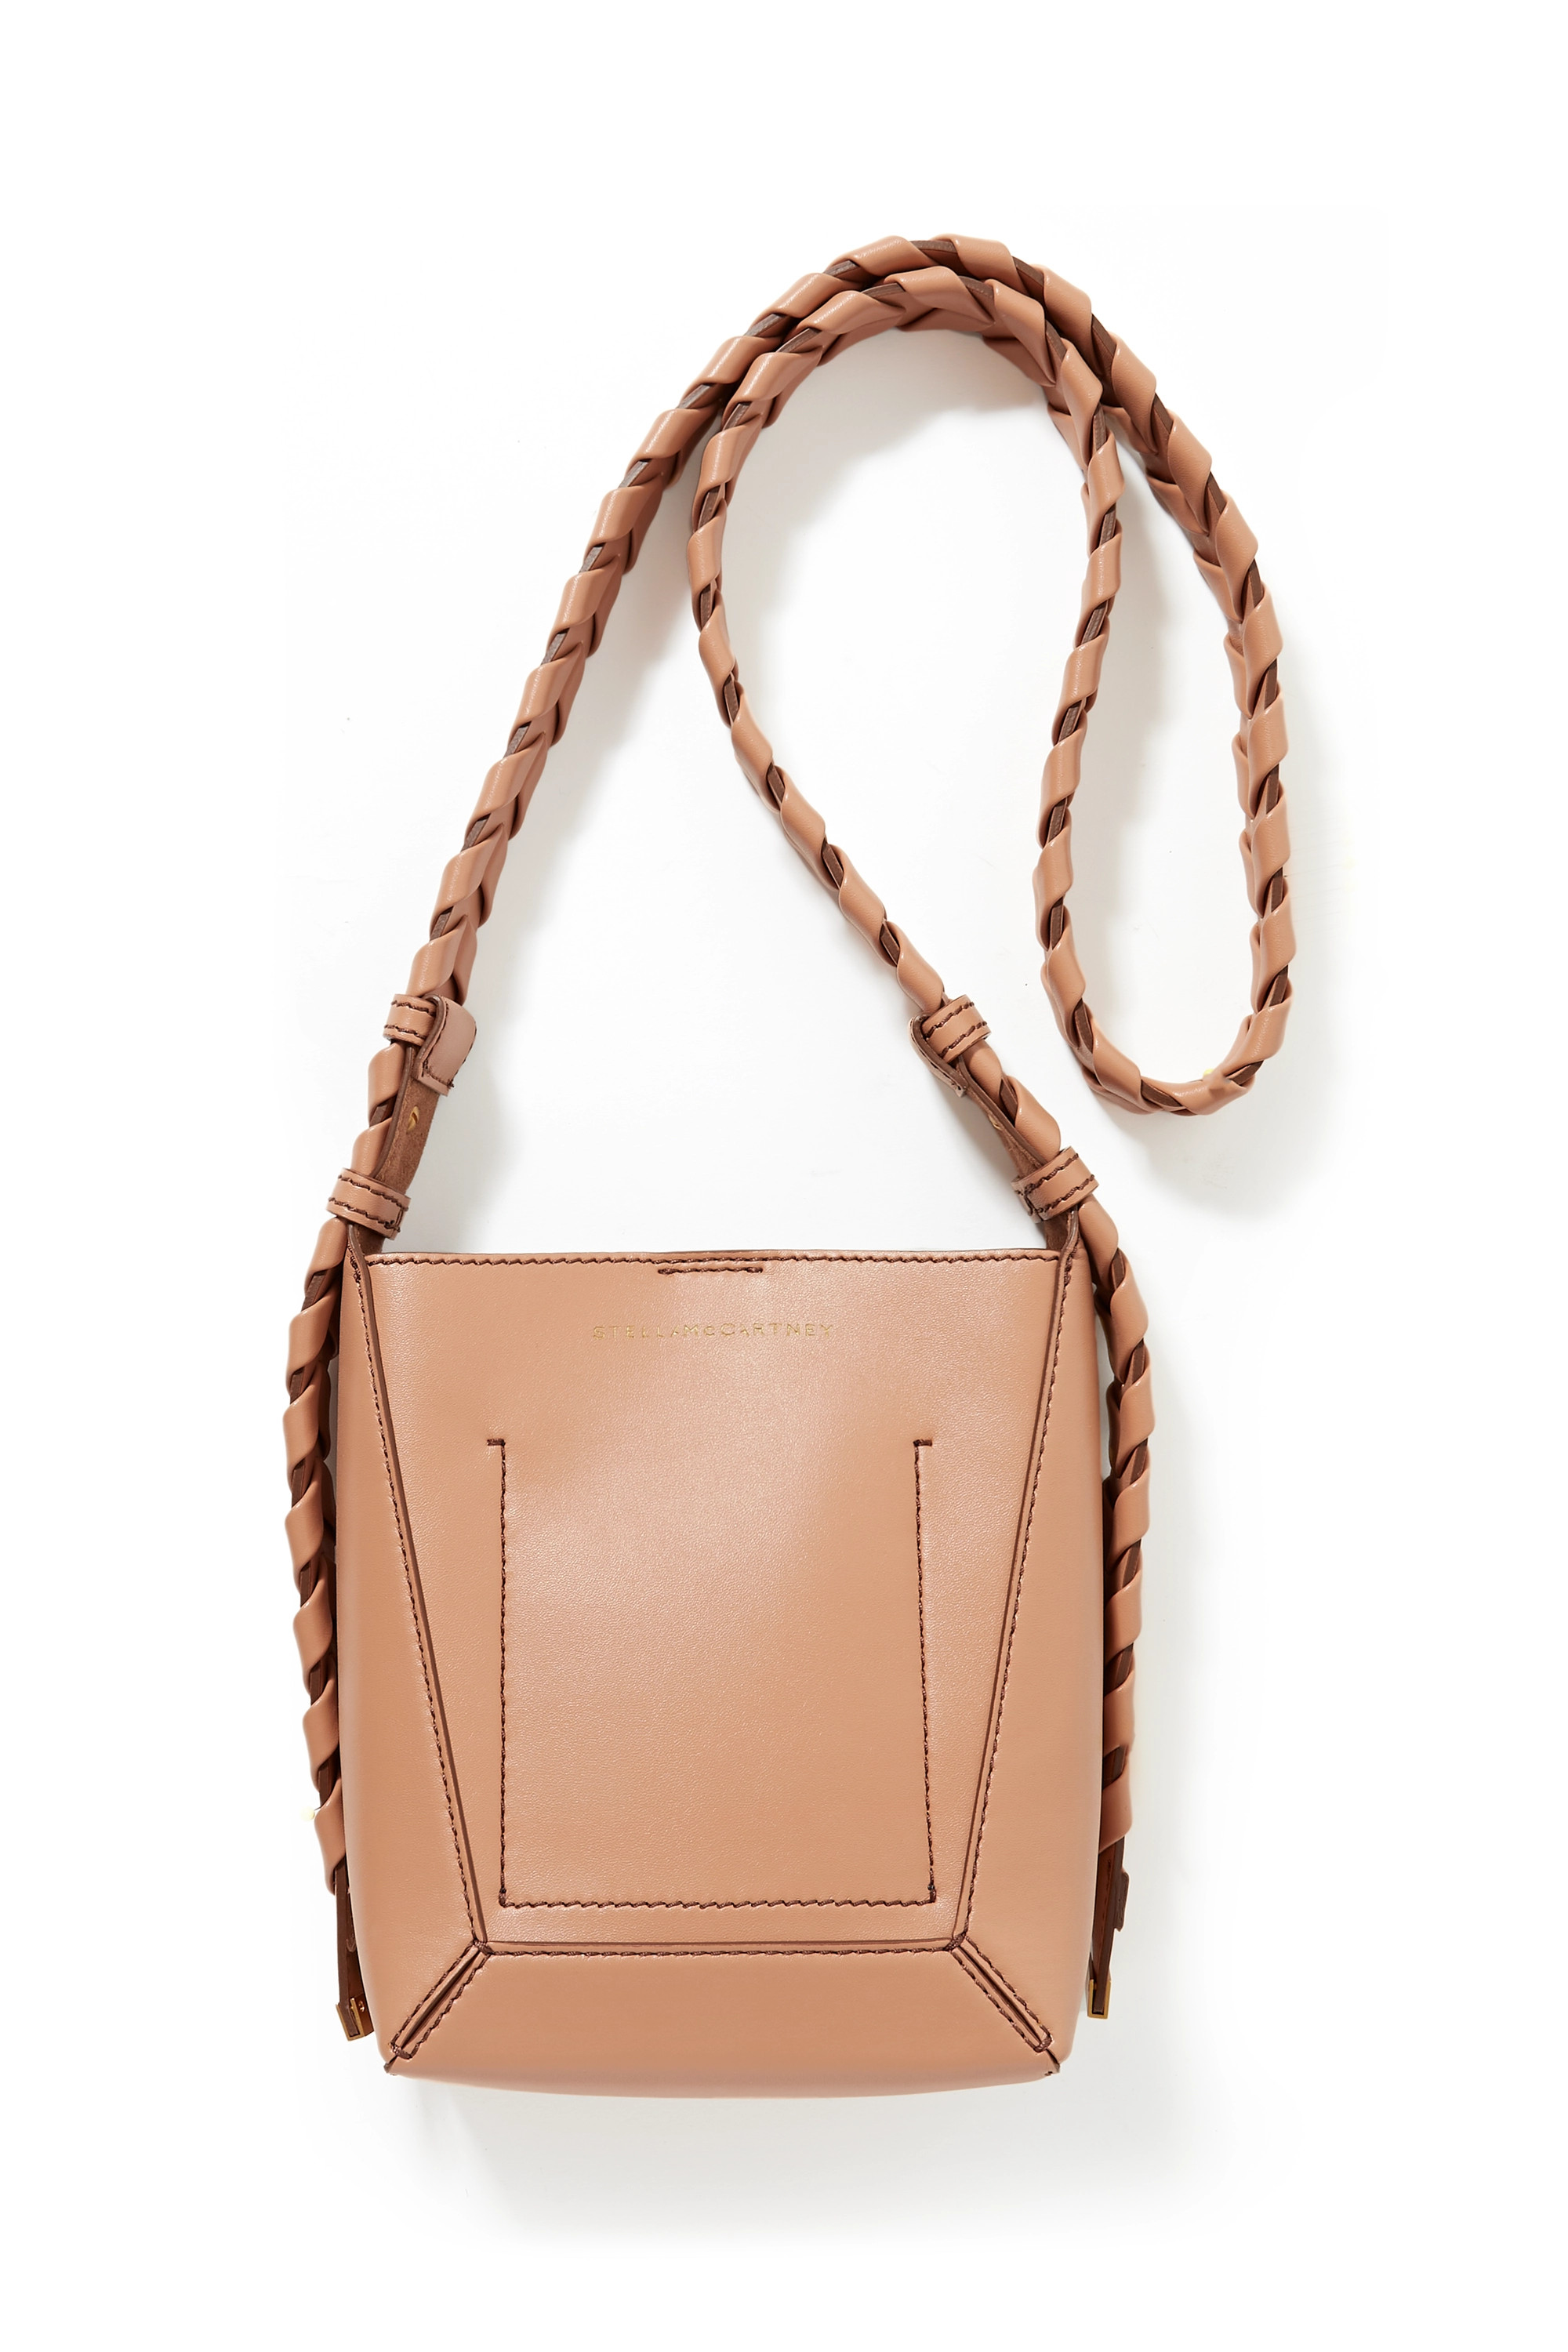 Here's the list of 10 attractive truly vegan leather bags